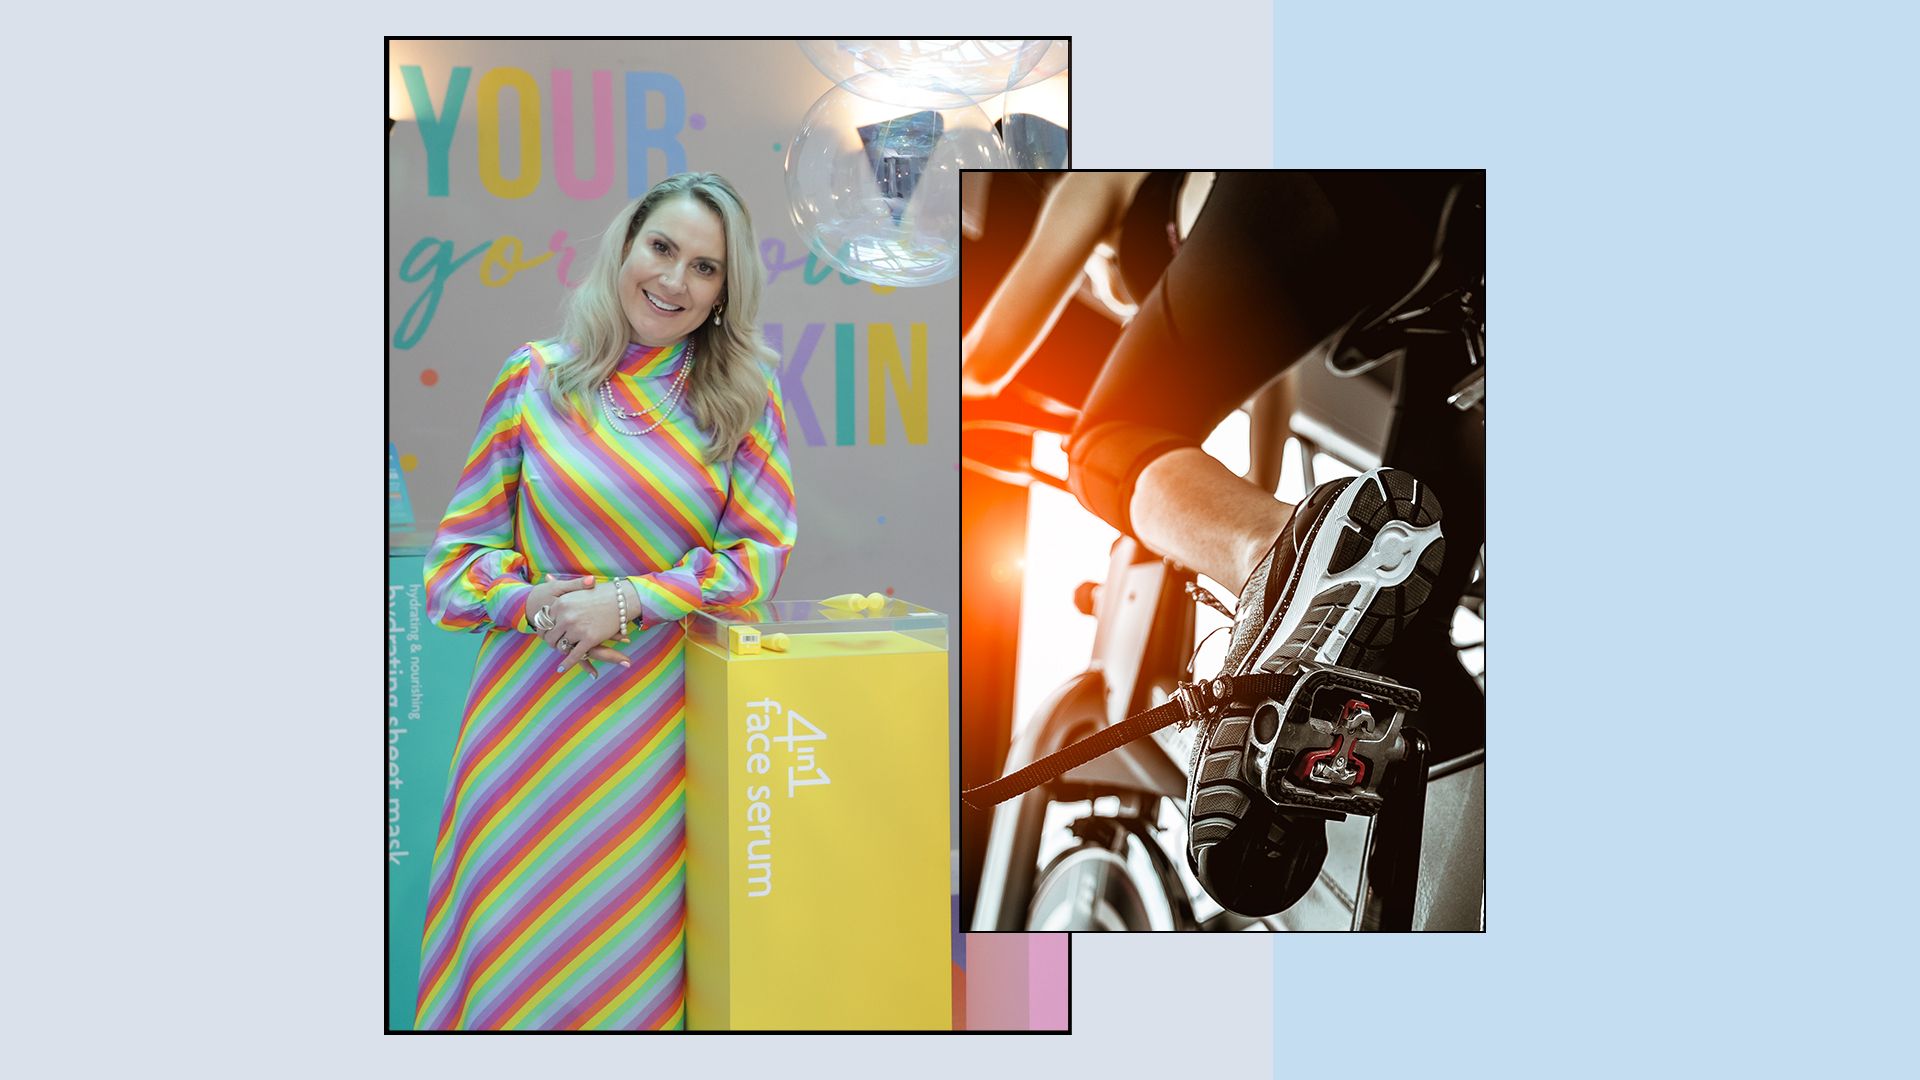 split screen photo of a woman in a rainbow dress and a person on an exercise bike